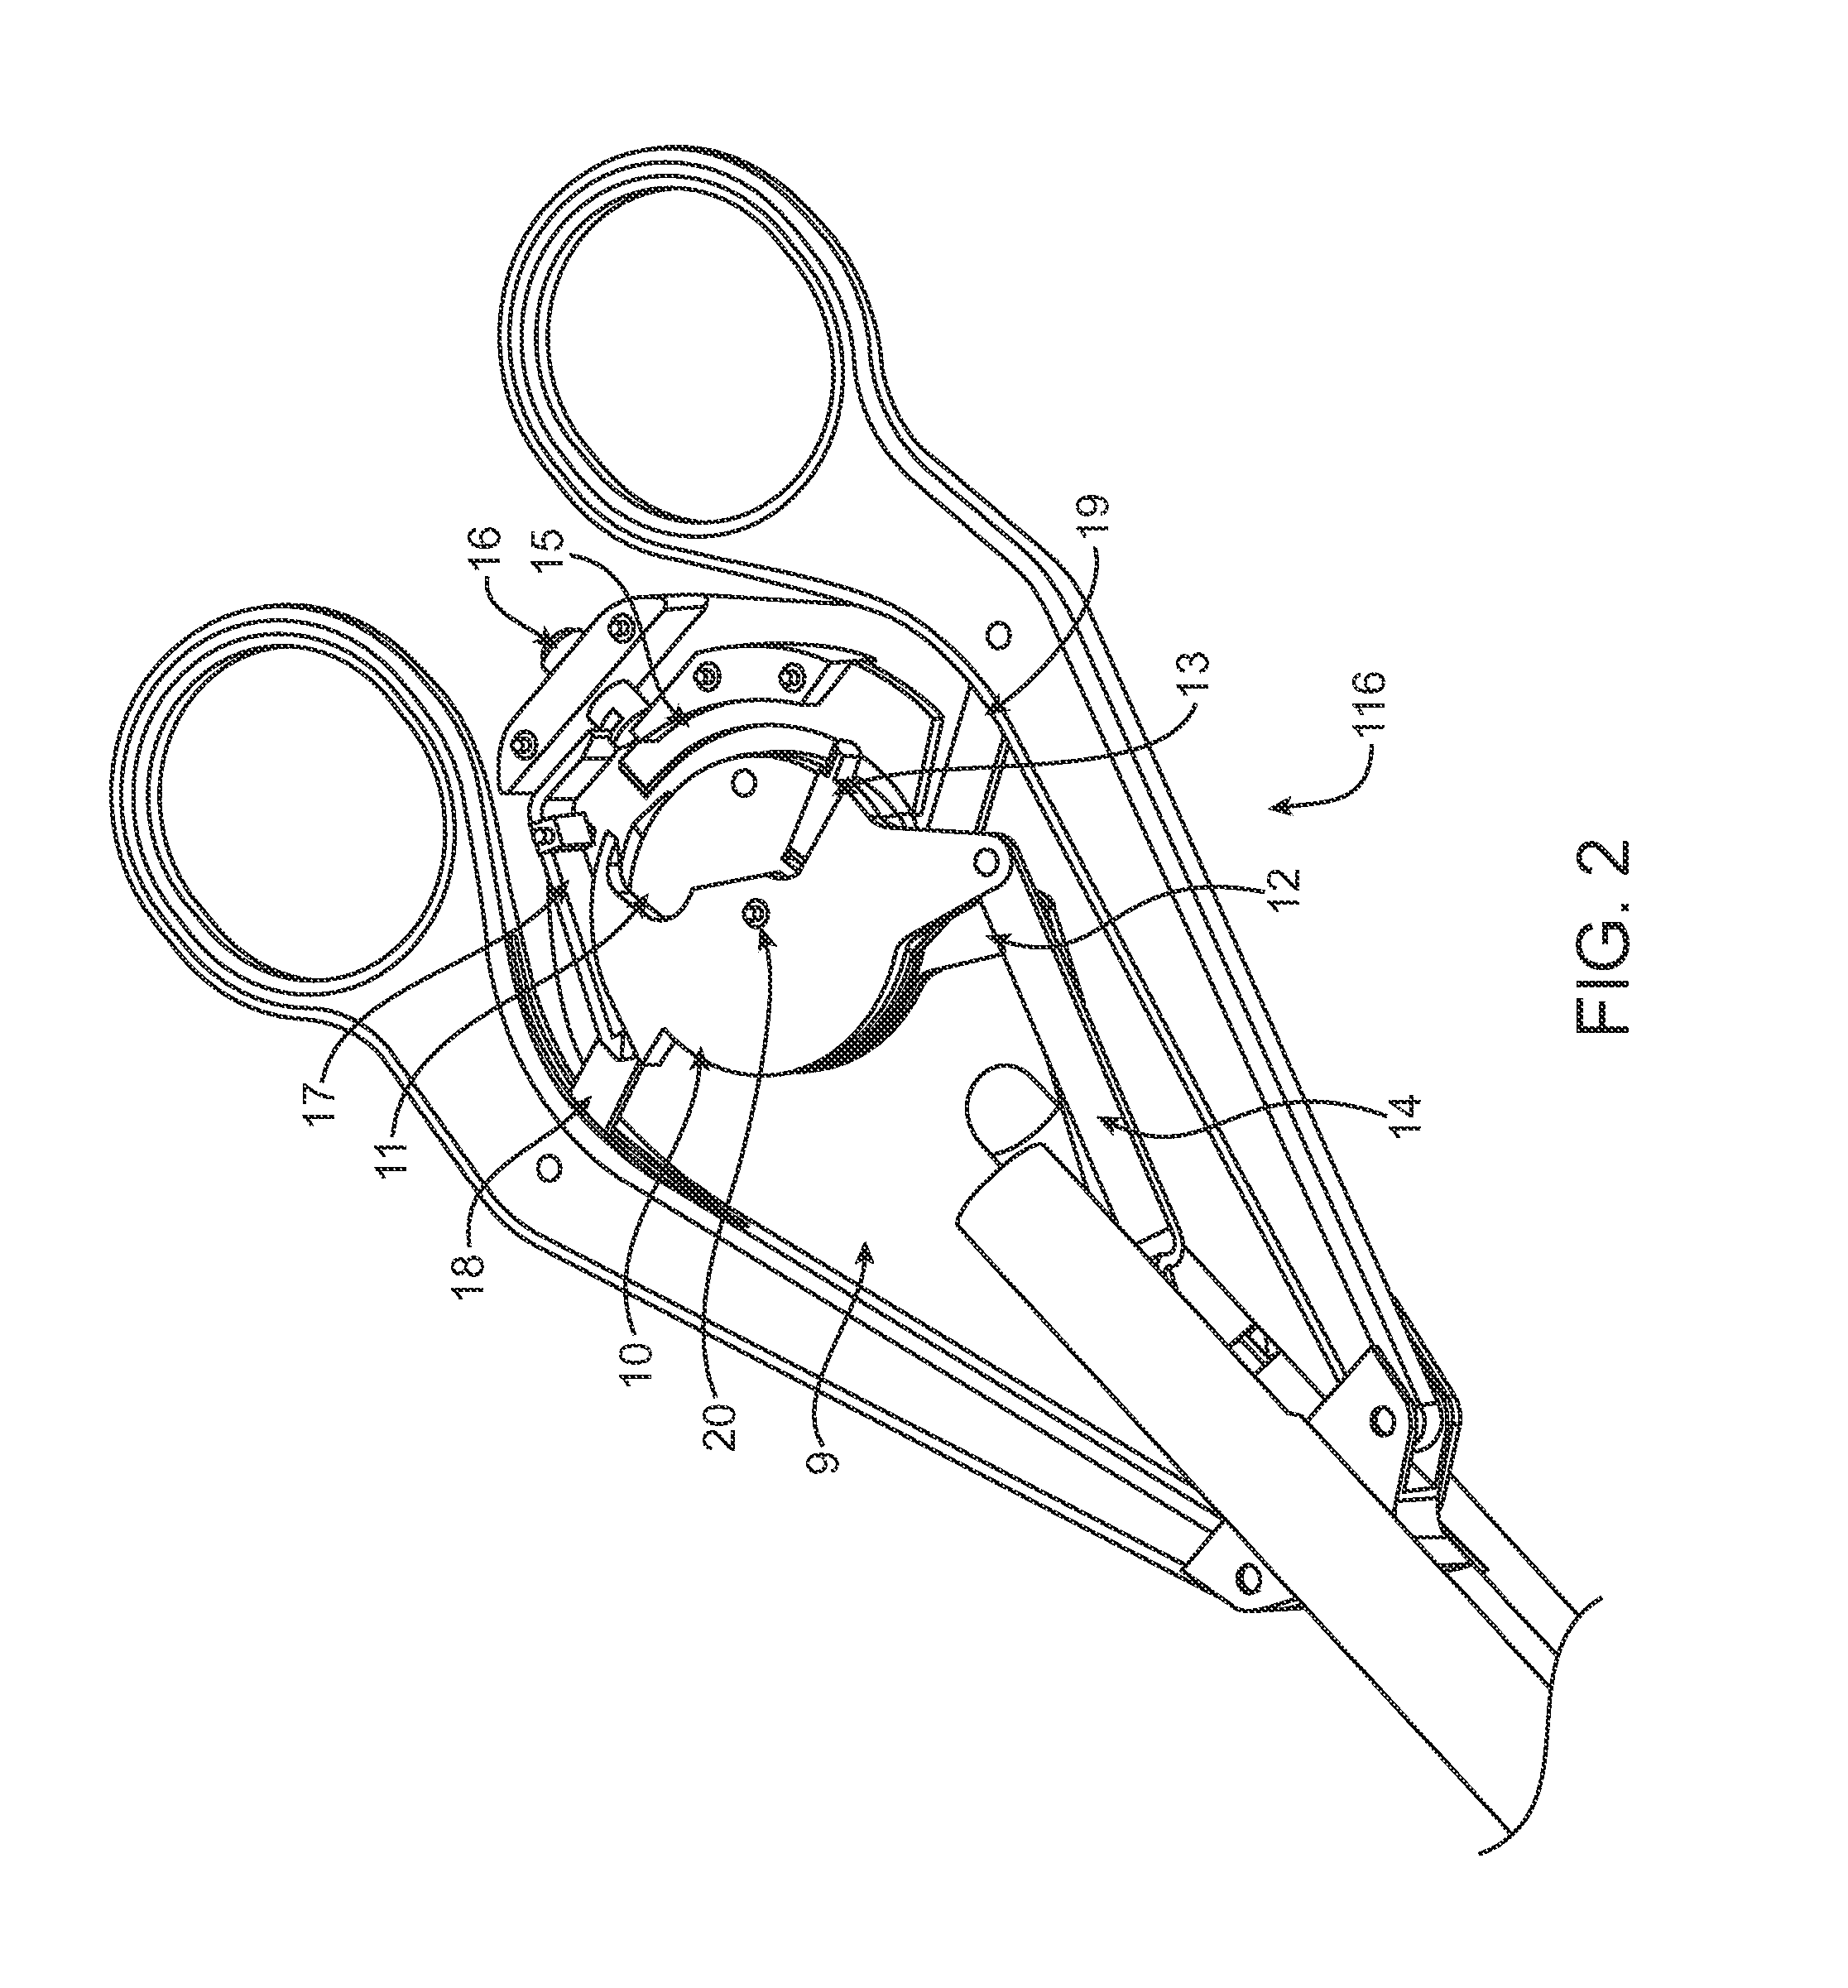 Suturing Device, System, and Method